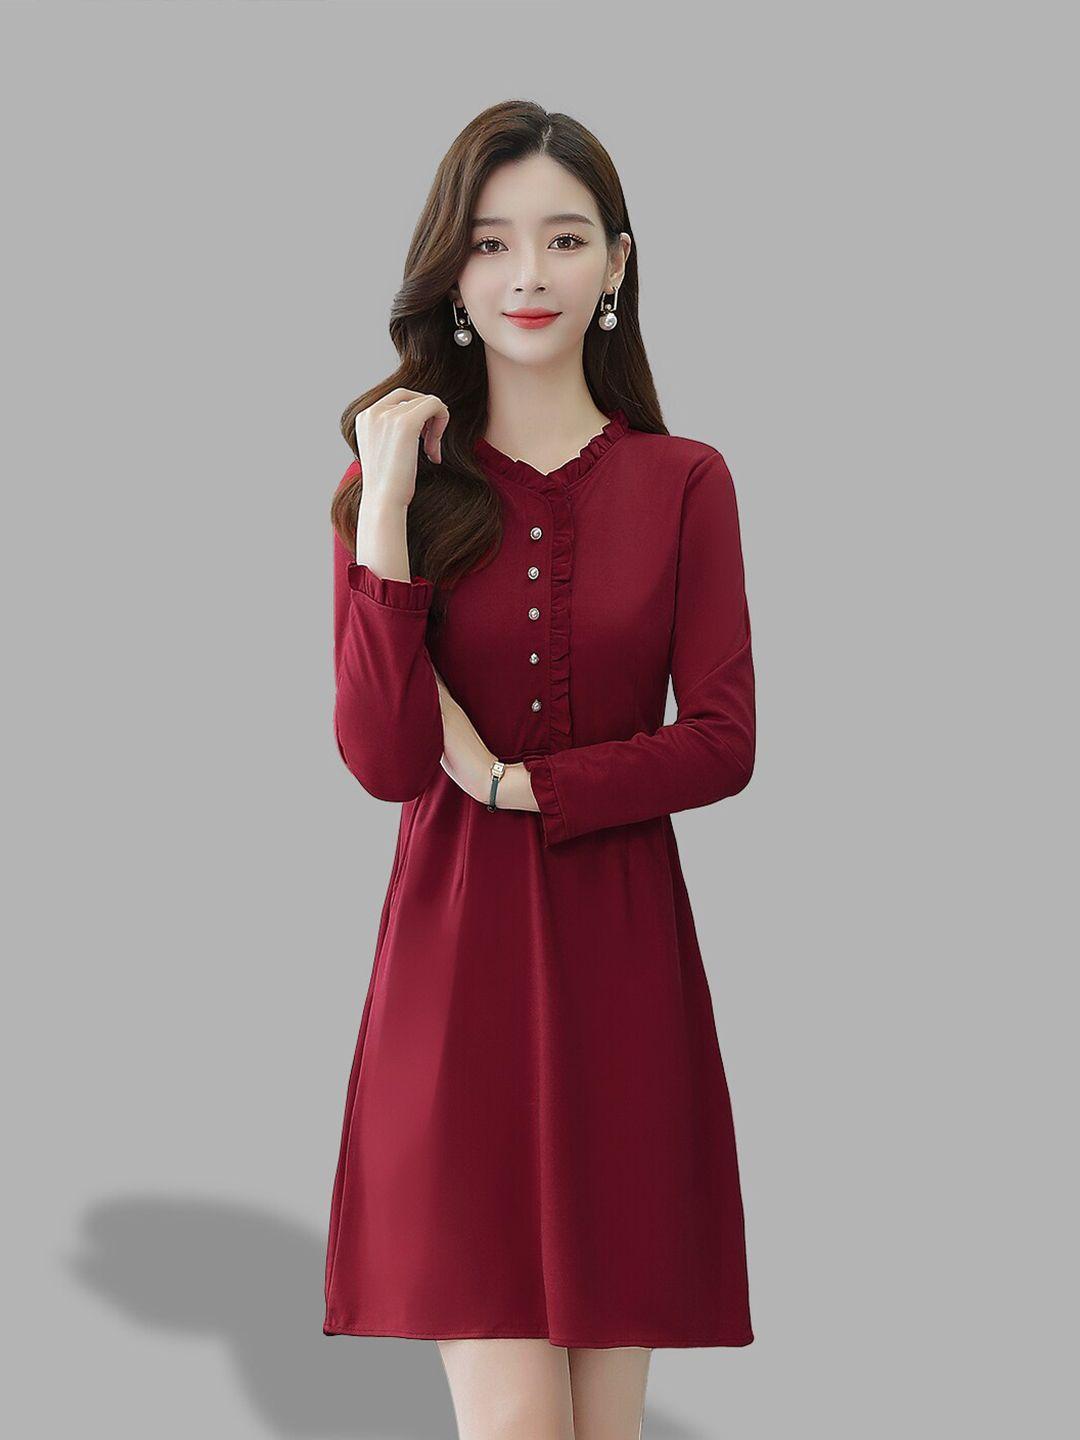 jc collection women red dress